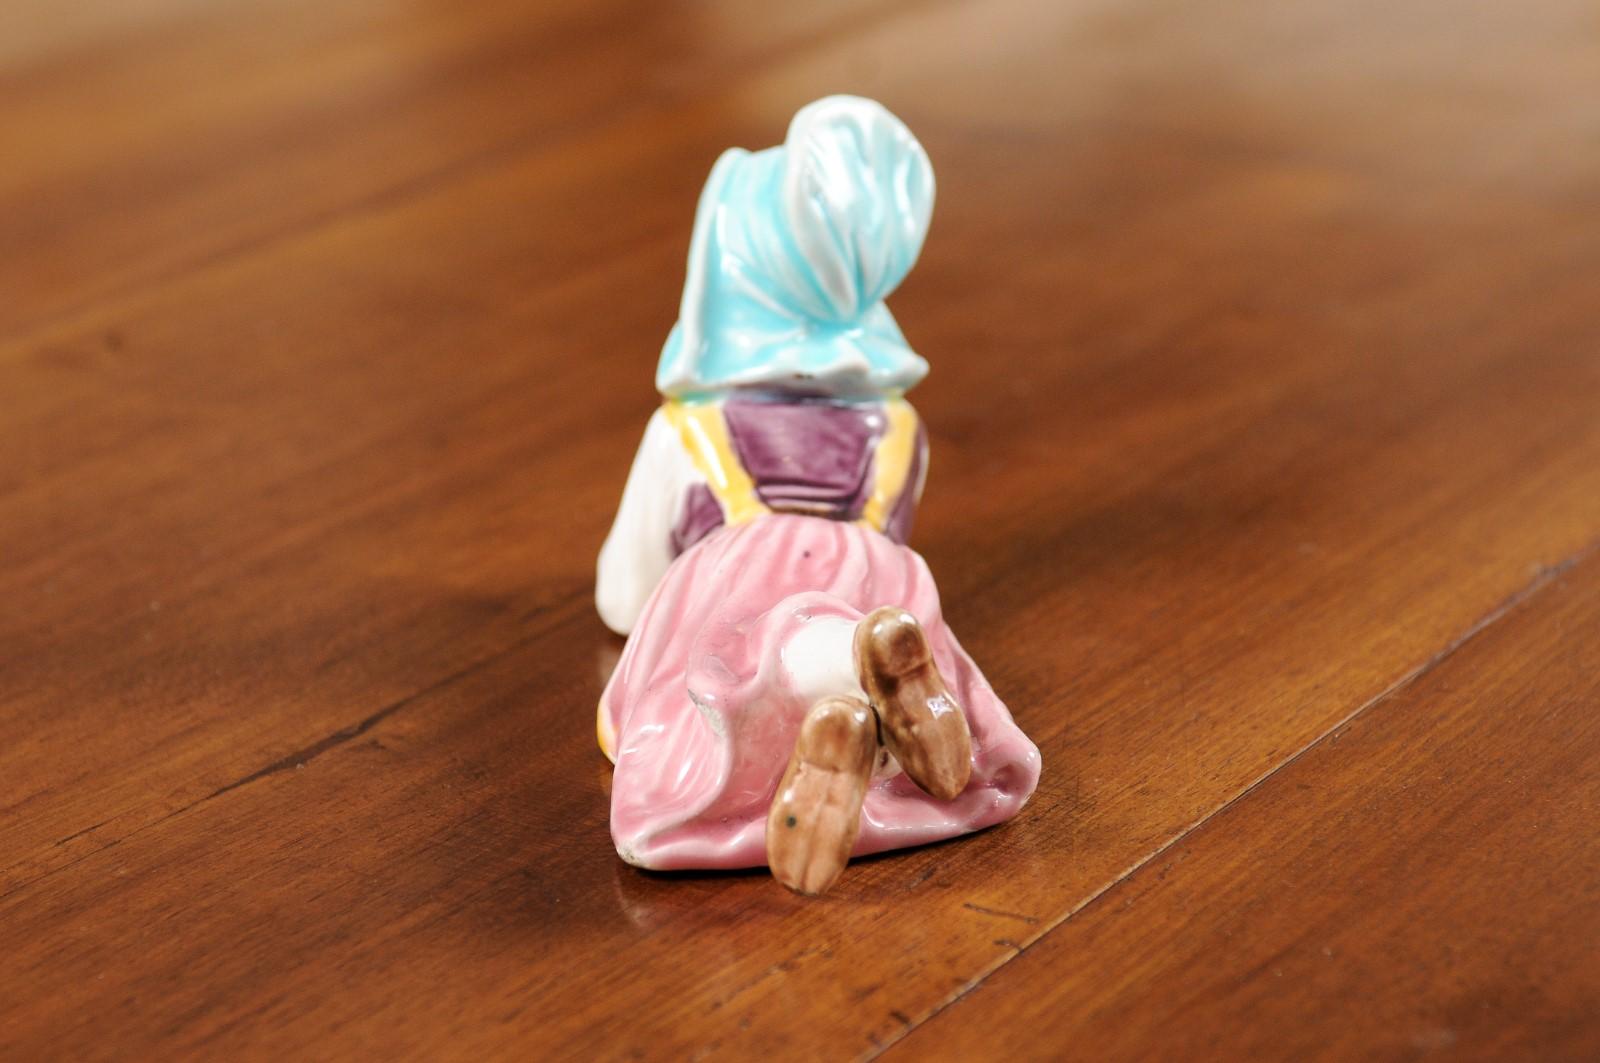 Petite English Porcelain Figurine Depicting a Young Girl Laying on the Ground For Sale 3